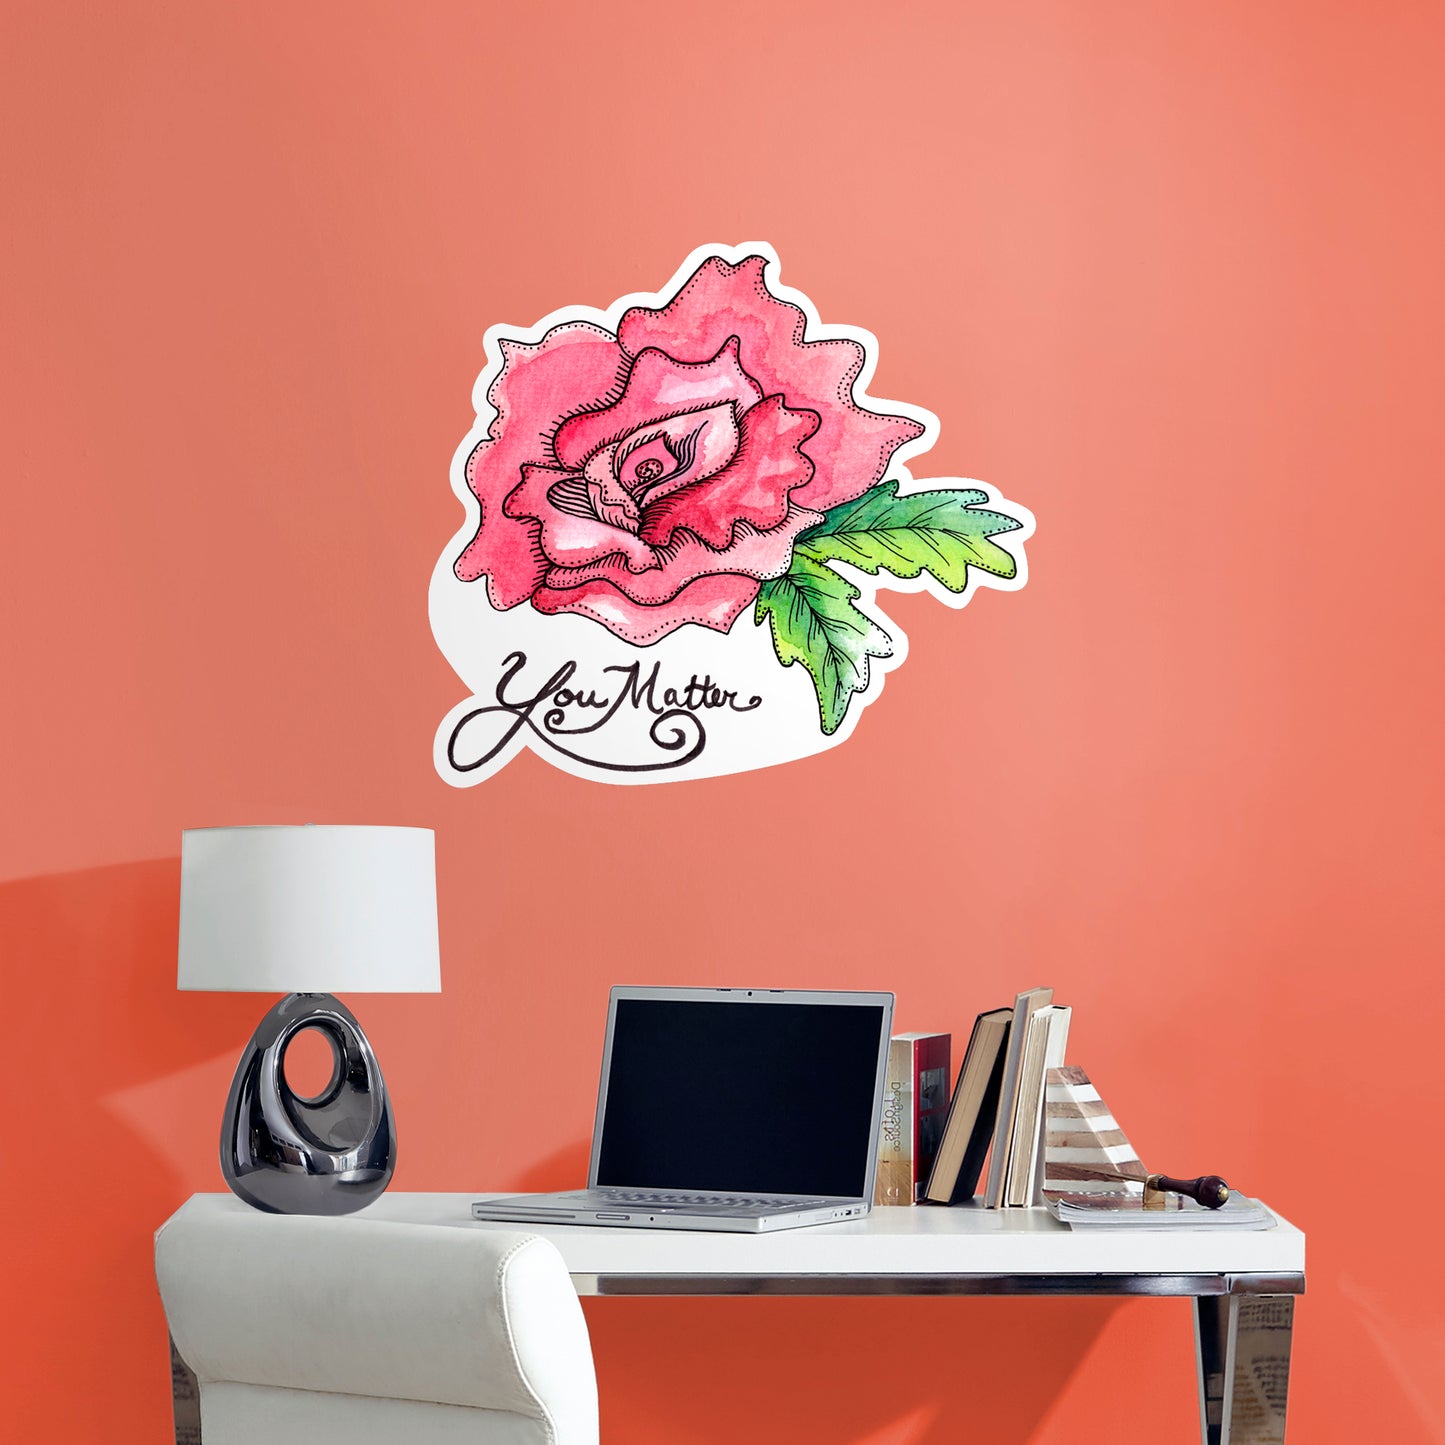 X-Large Decal (24"W x 26"H)